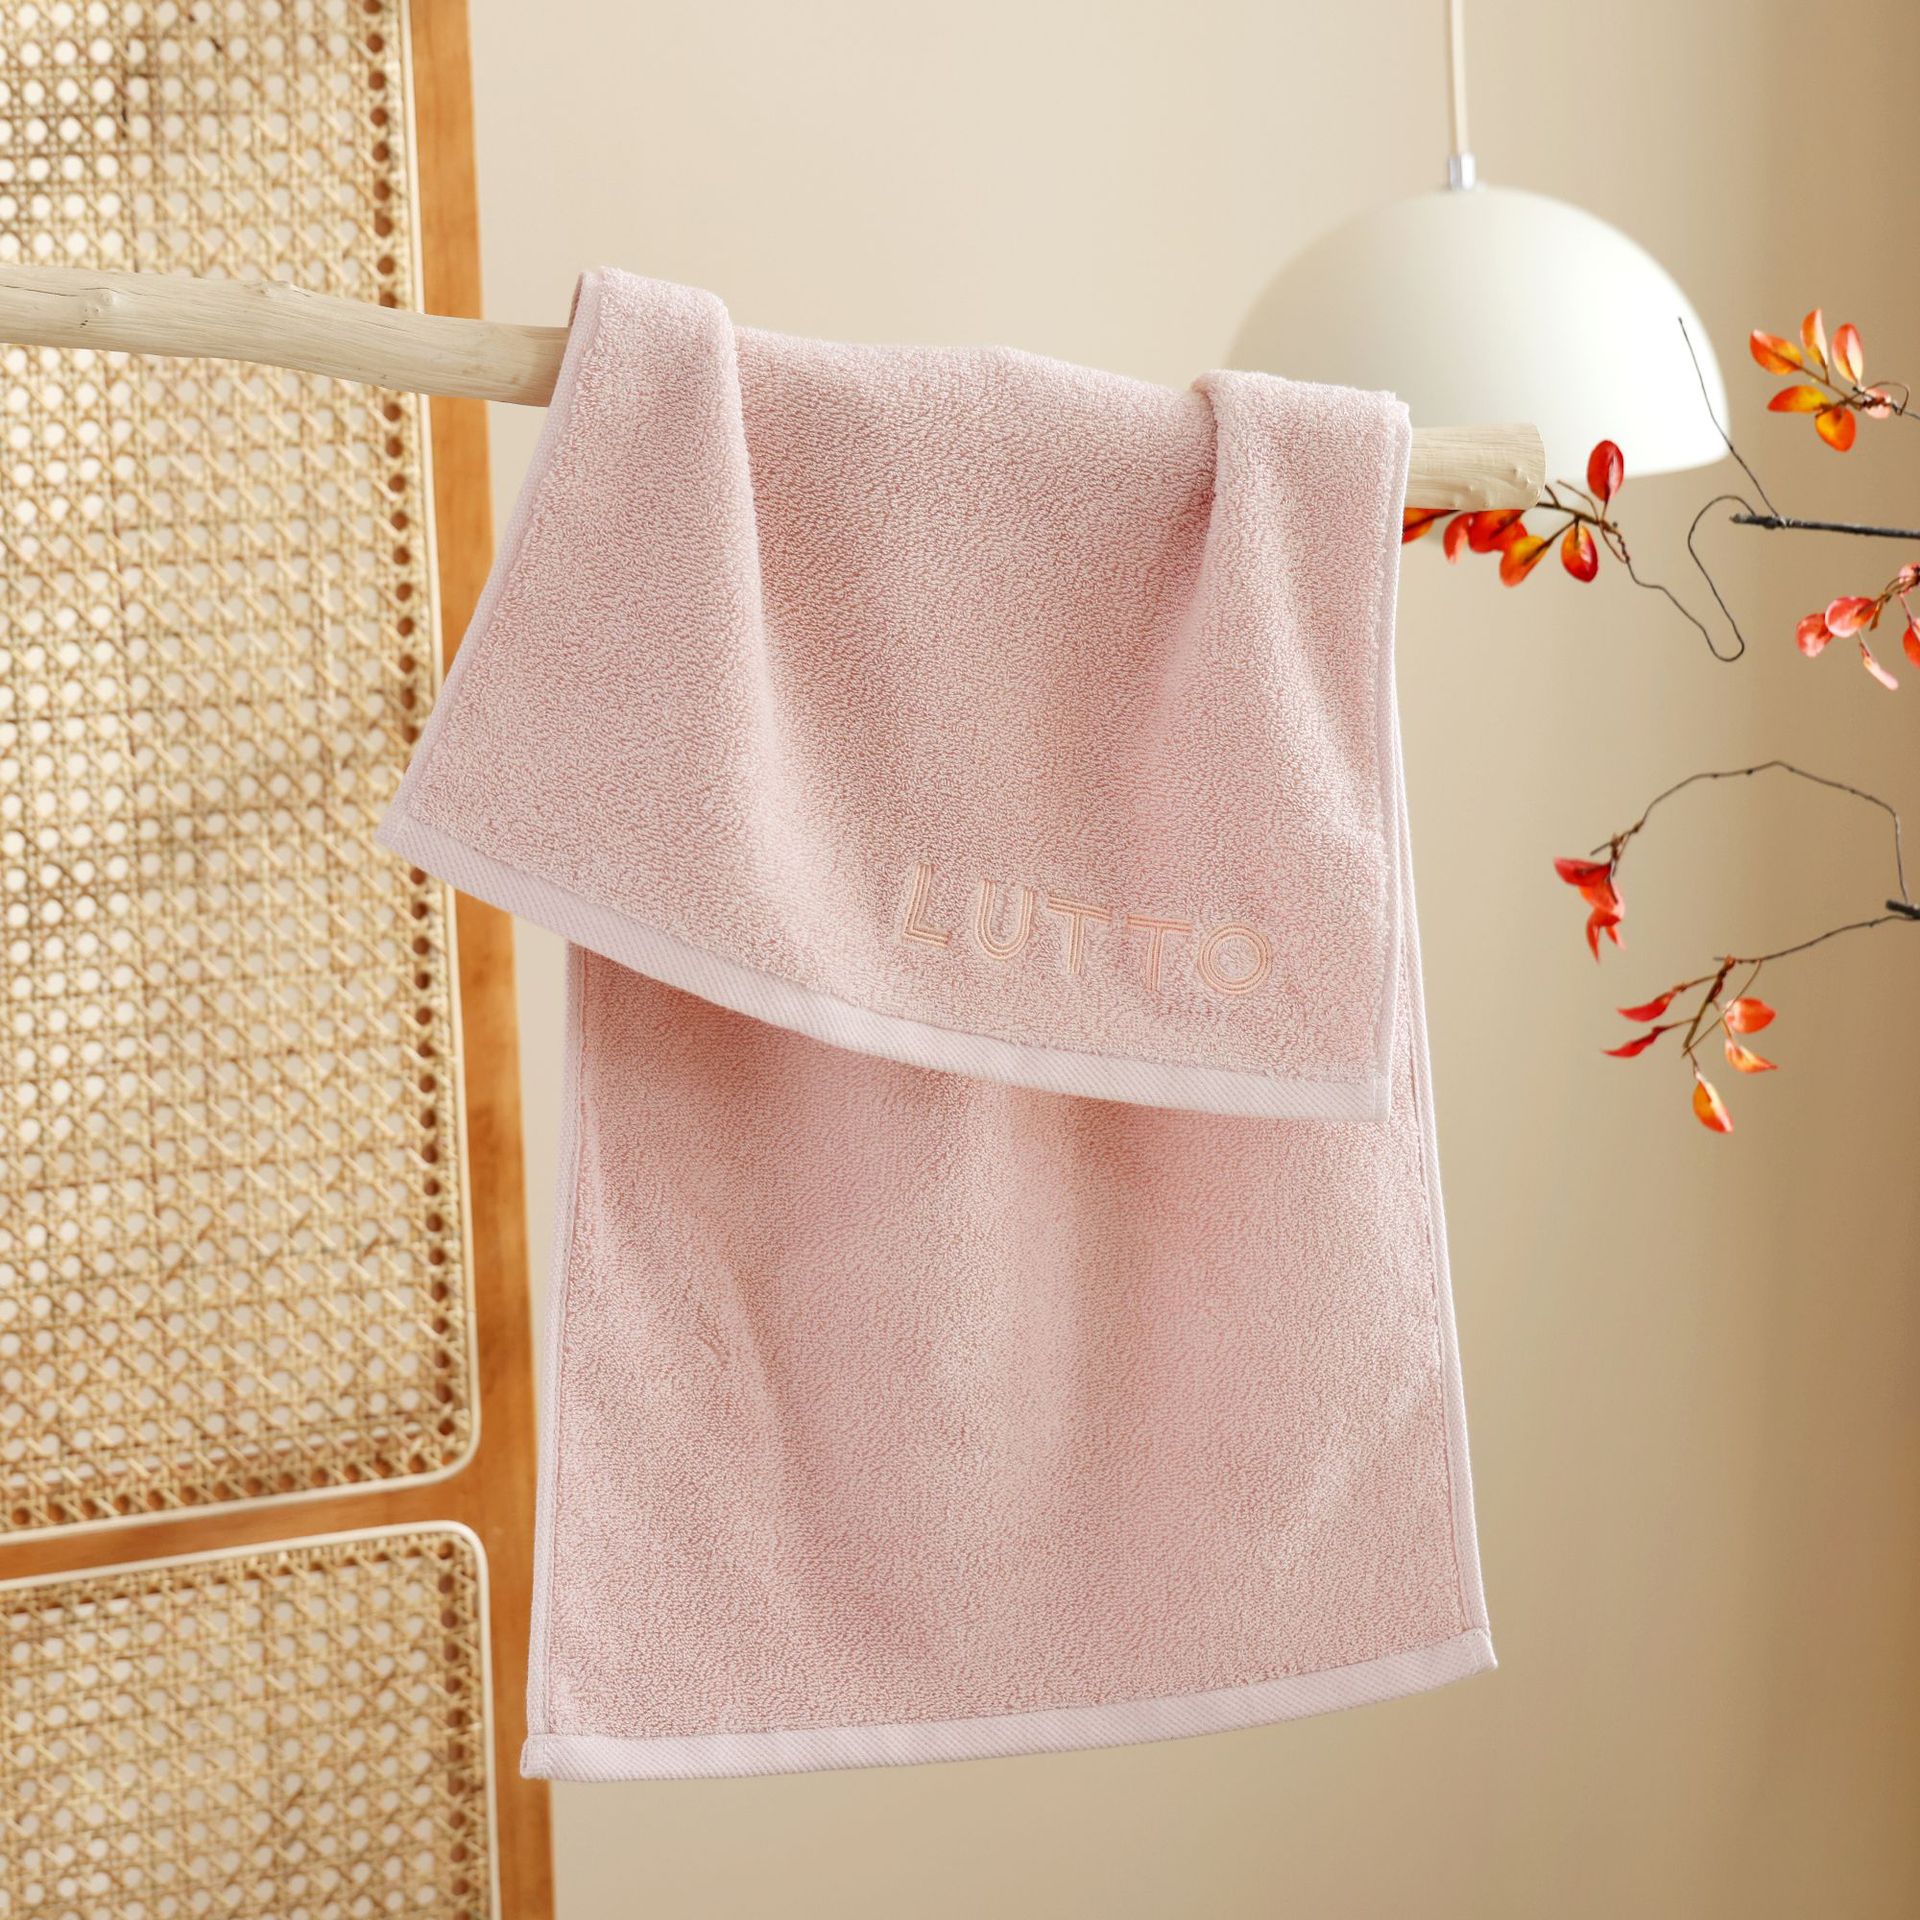 Class a Light Luxury Pure Cotton Towel Cotton Adult Face Towel Thickened Absorbent Group Purchase Welfare Return One-Piece Delivery